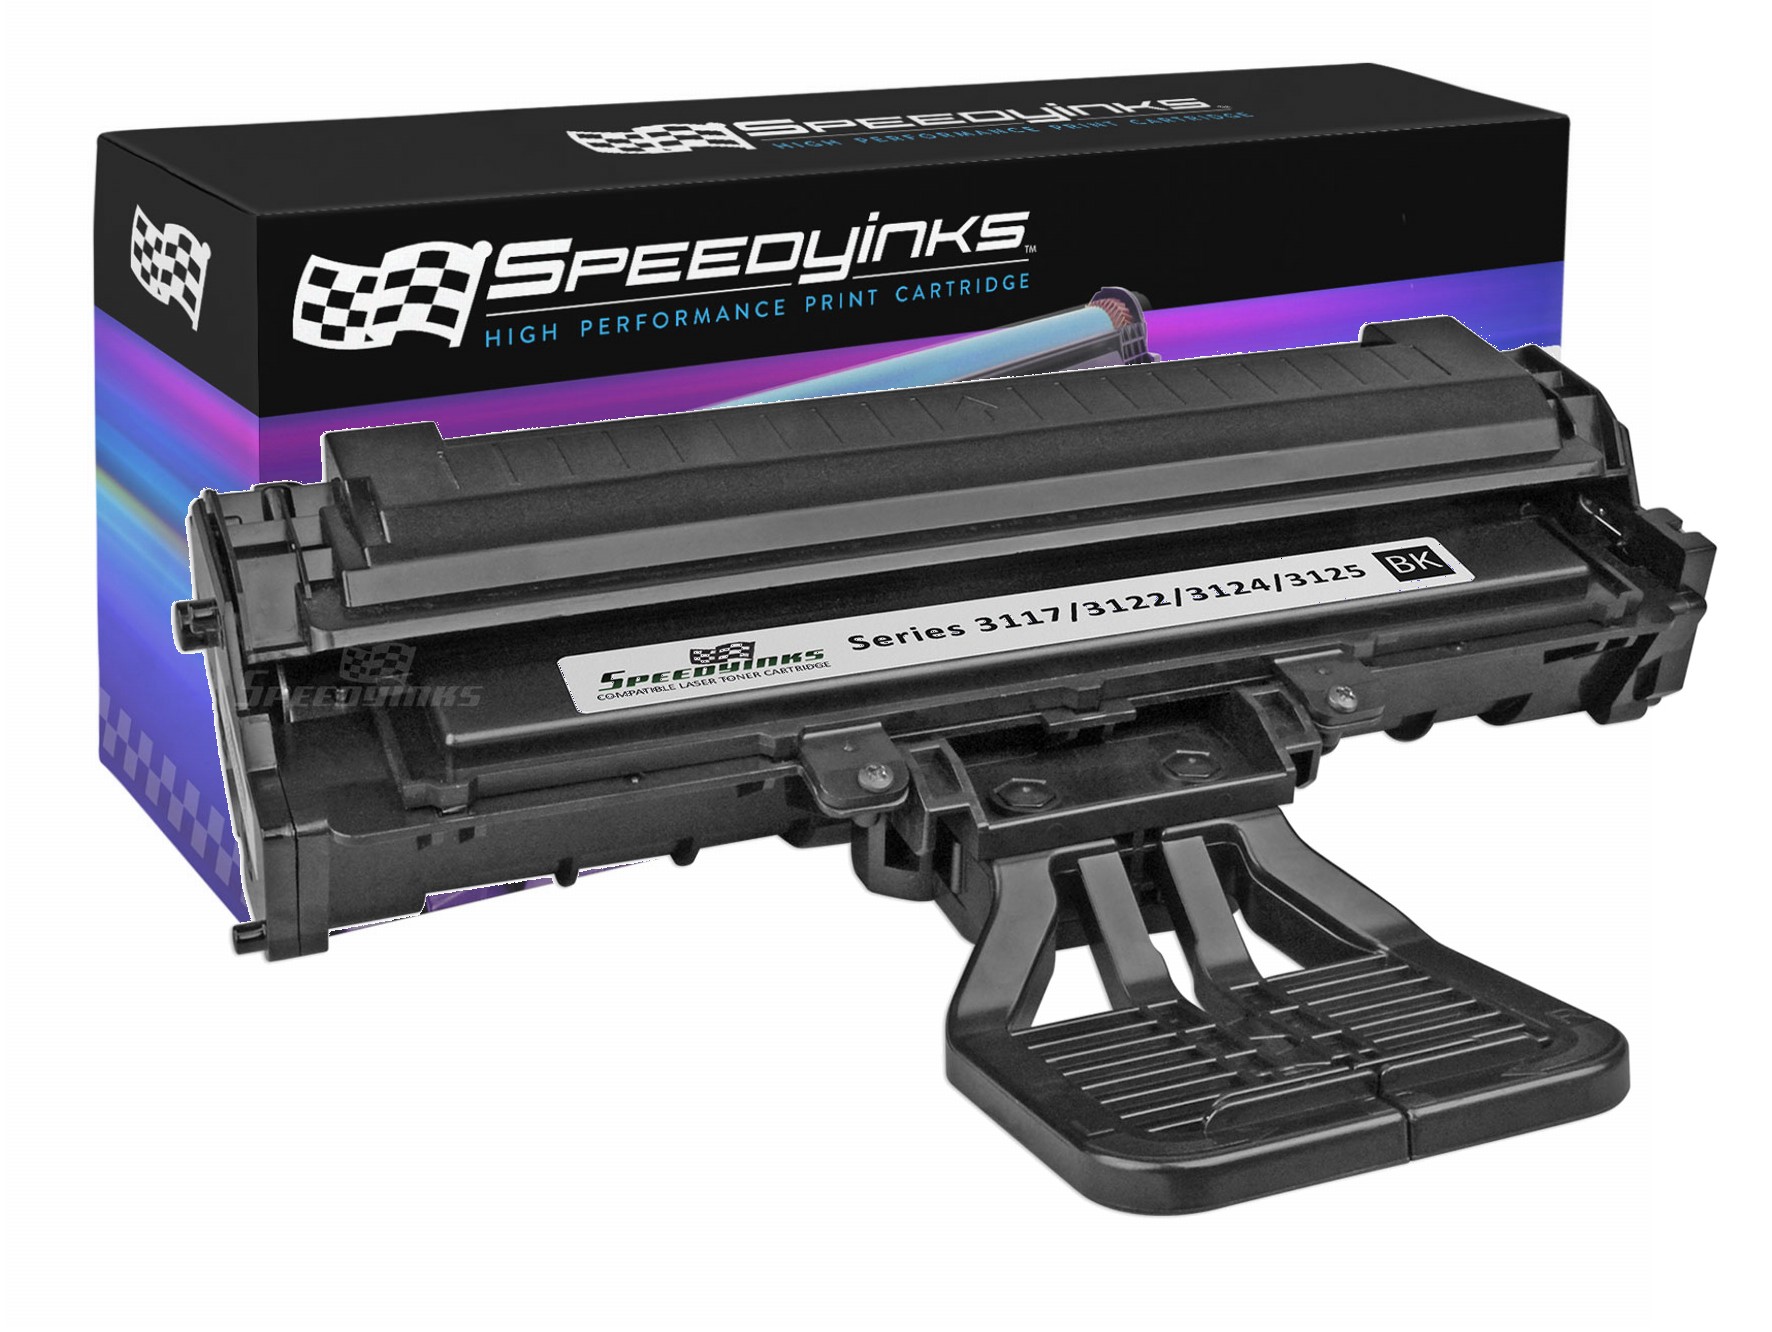 Speedy - Compatible Xerox 106R1159 Black Toner 3, 000 Pages for use in Xerox Phaser 3124, Xerox Phaser 3117, Xerox Phaser 3125, Xerox Phaser 3122 - image 1 of 6